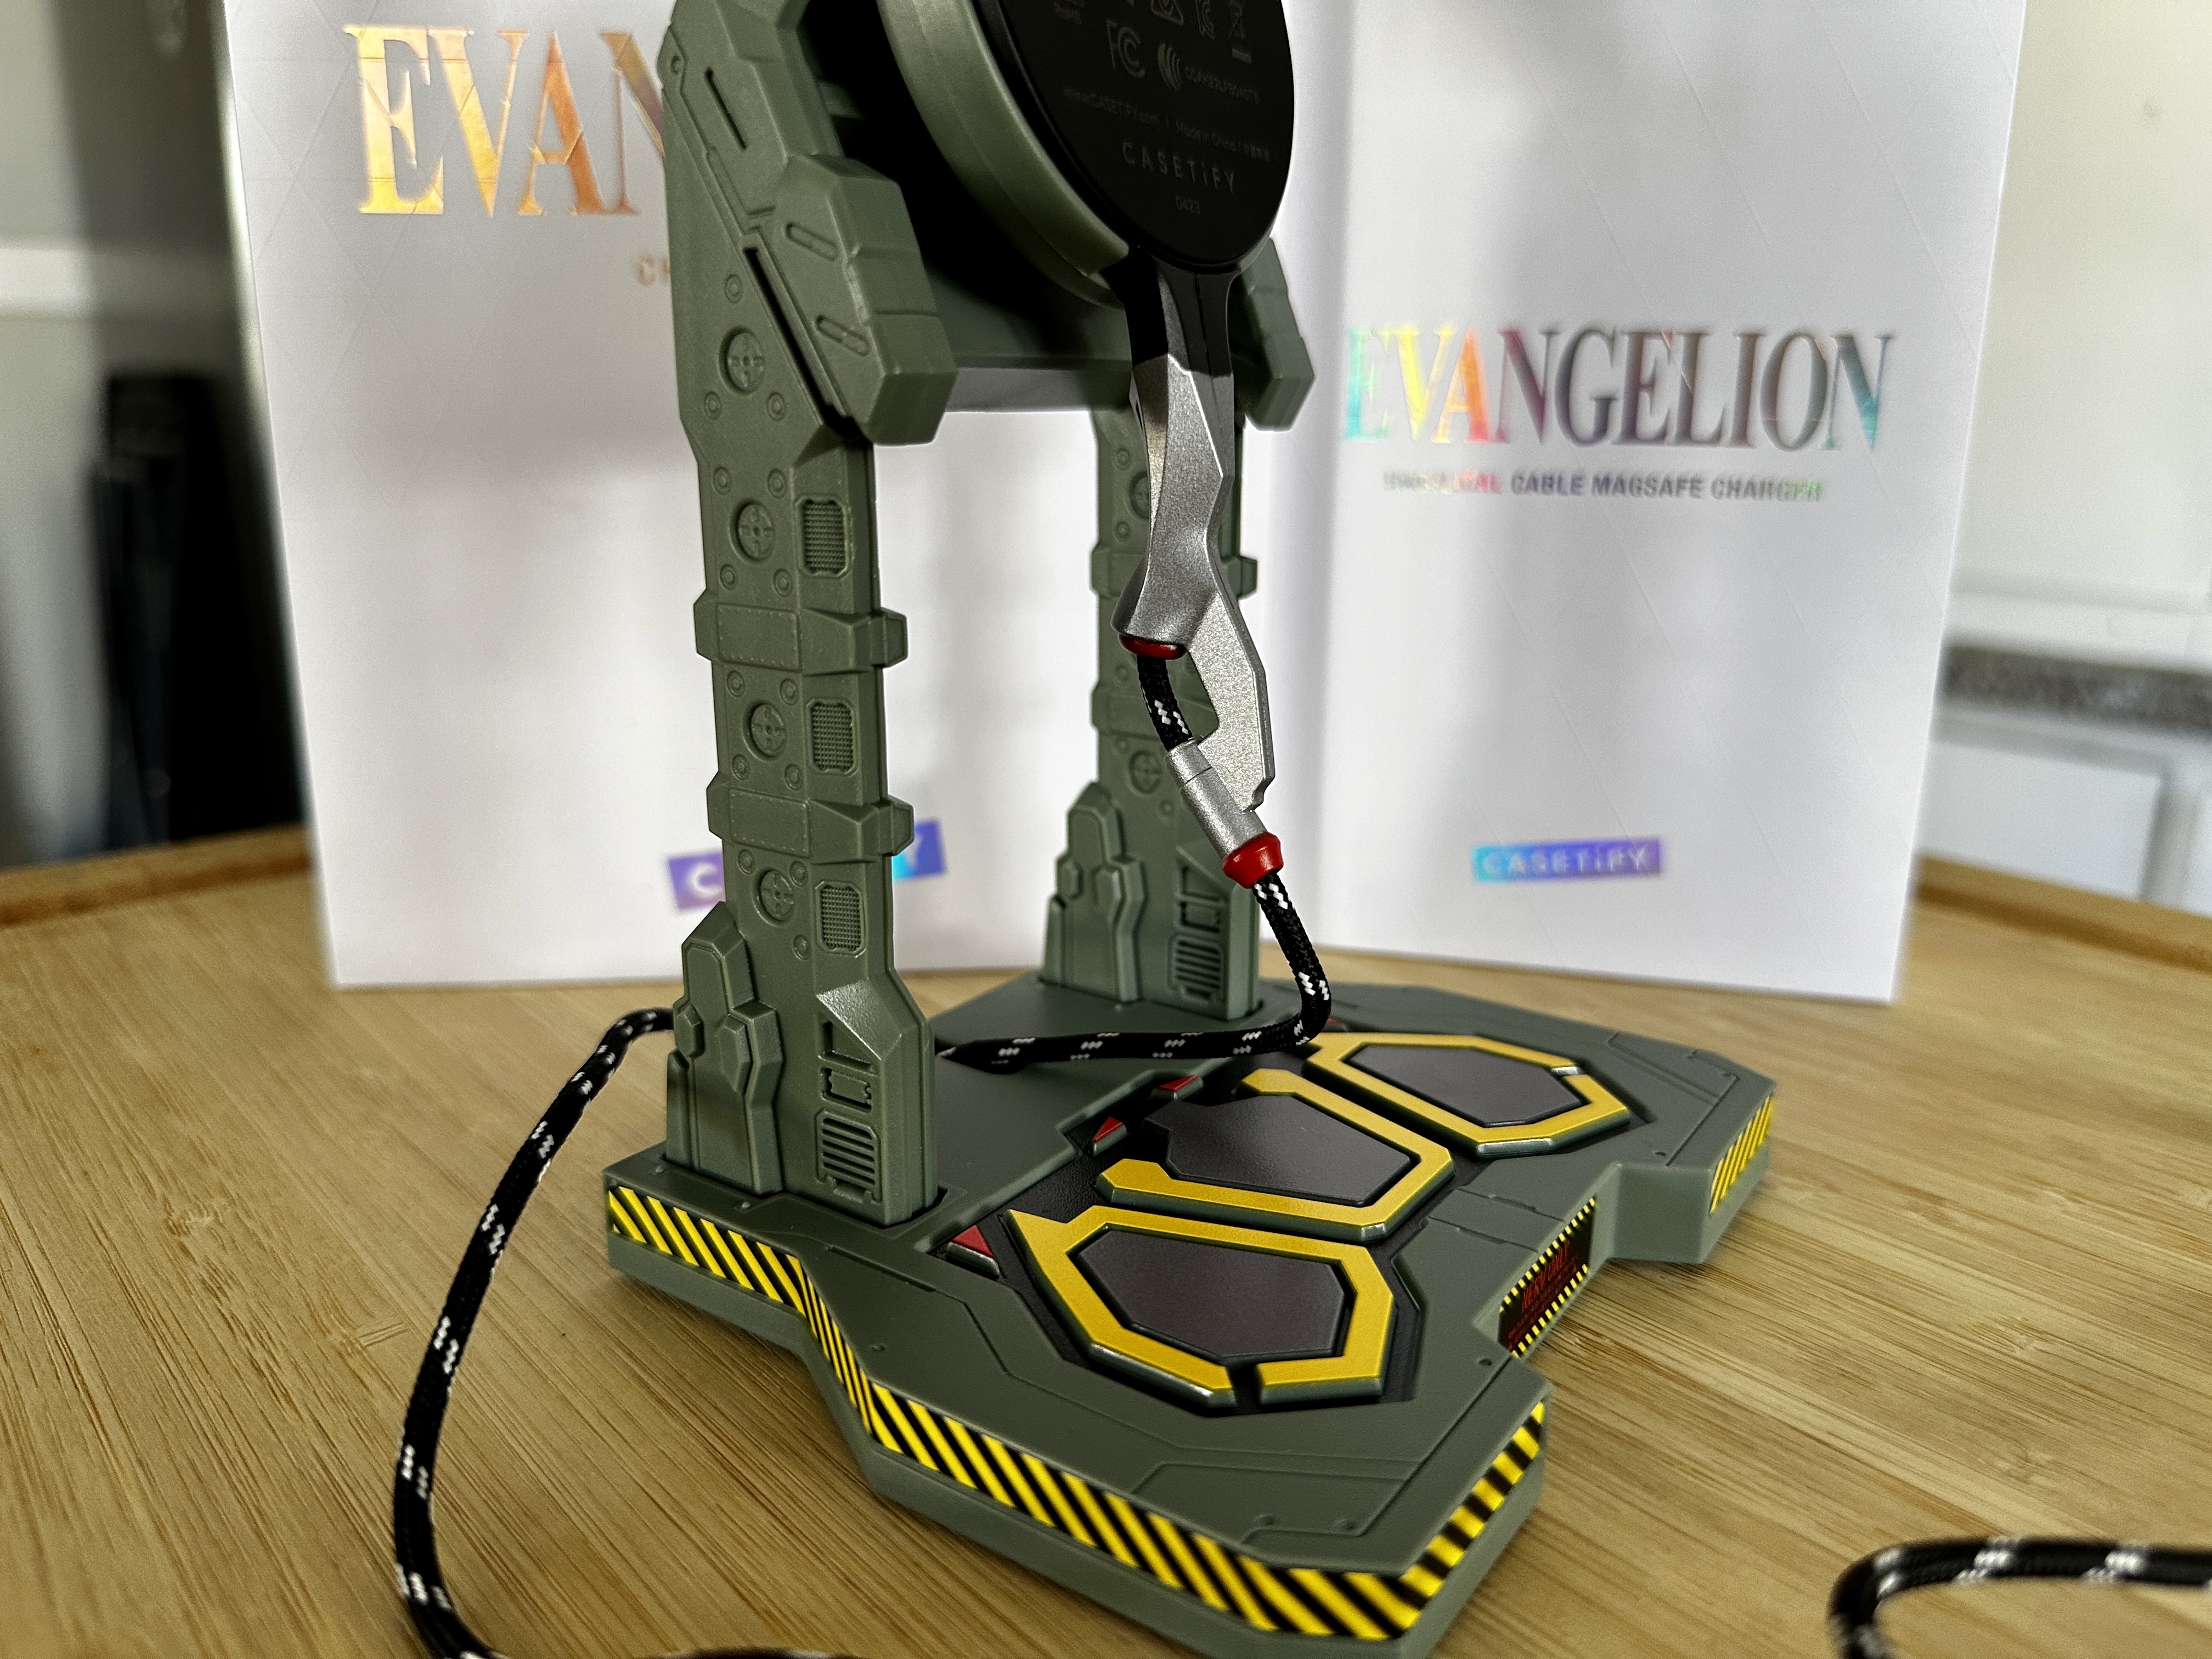 CASETiFY Evangelion Charging Dock base stand view.